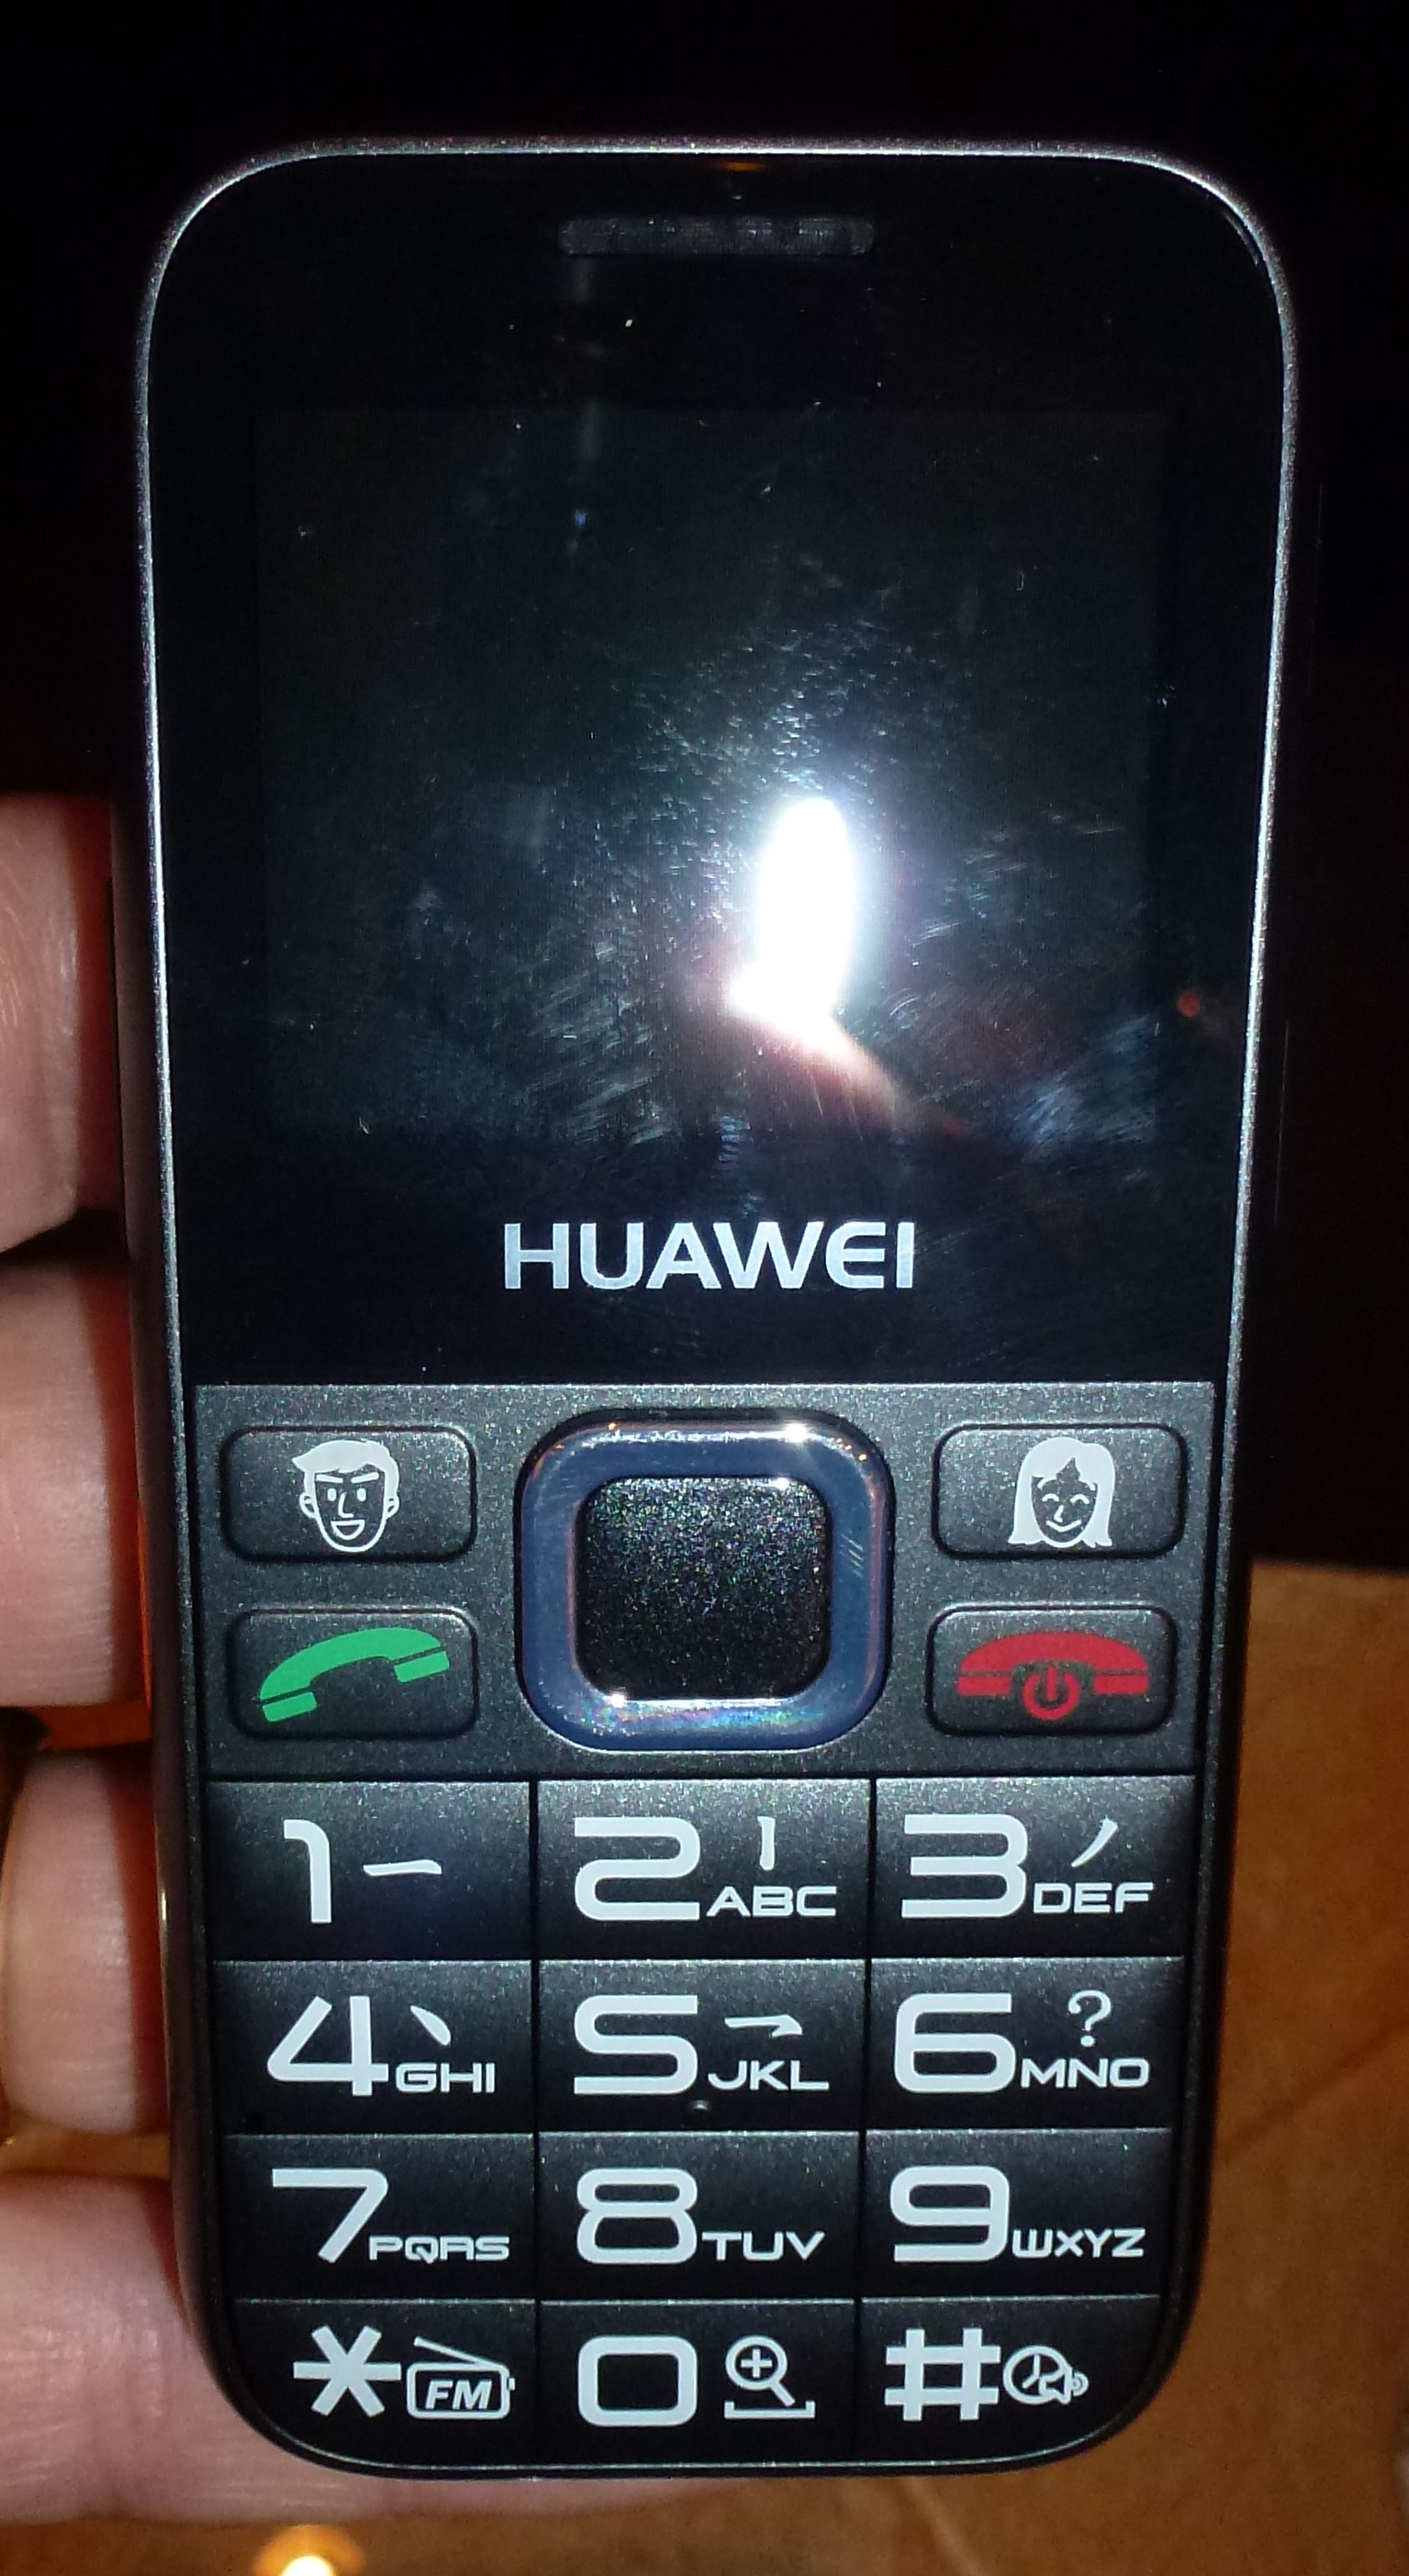 Huawei G5000  easy use phone    Flickr   Photo Sharing